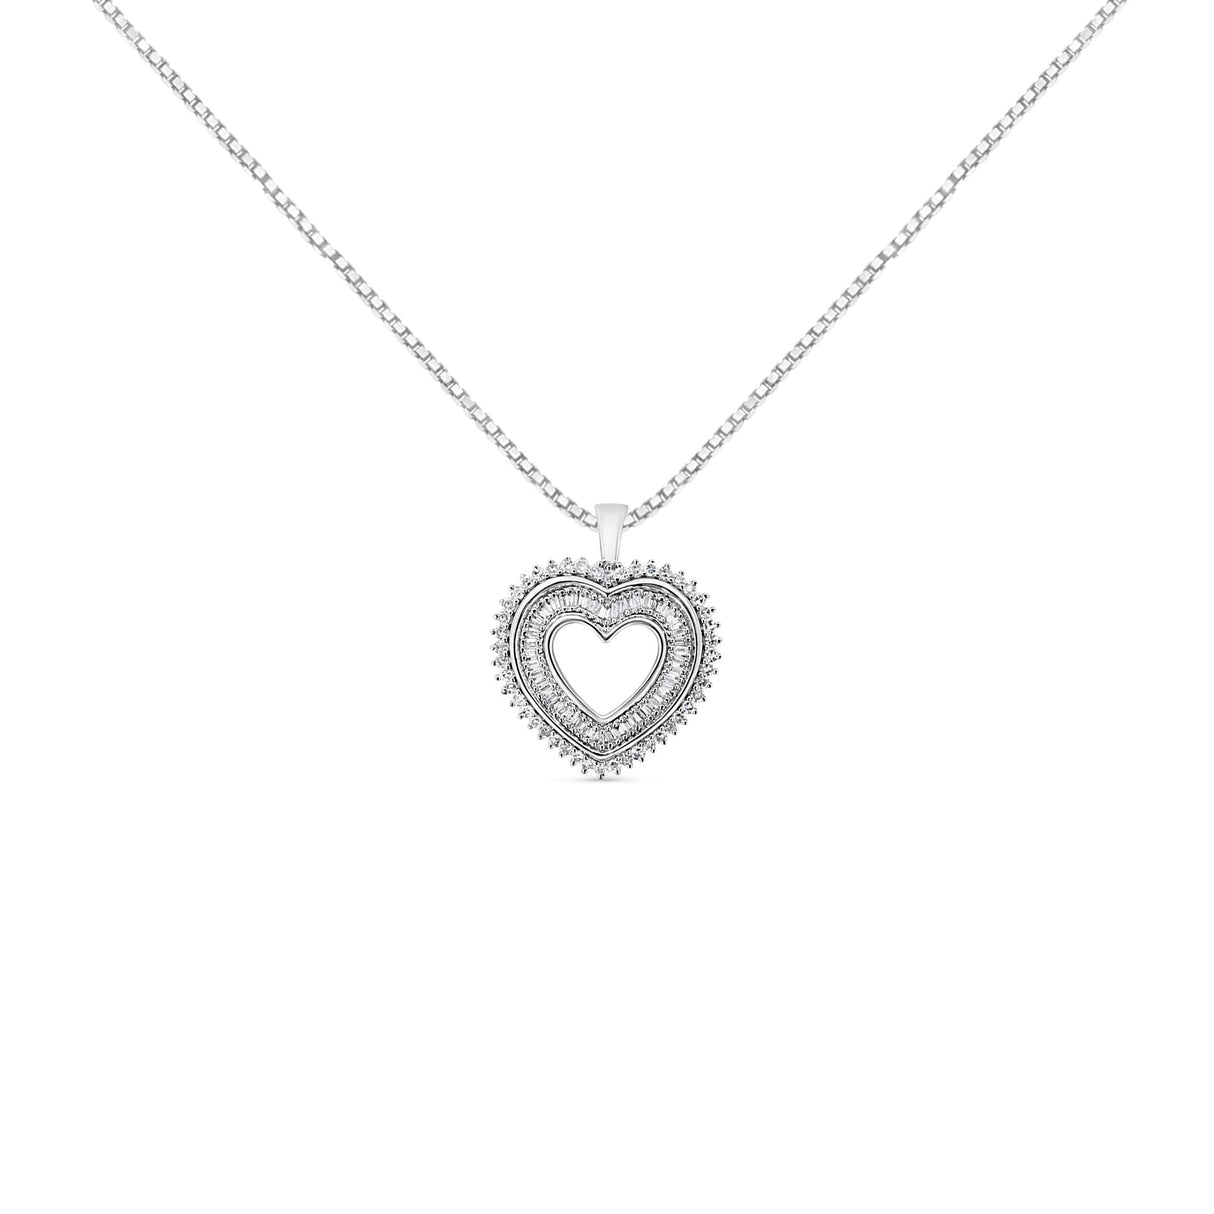 .925 Sterling Silver 1.0 Ctw Diamond Shadow Open Heart Halo 18" Pendant Necklace (I-J Color, I1-I2 Clarity) - Tuesday Morning-Pendant Necklaces